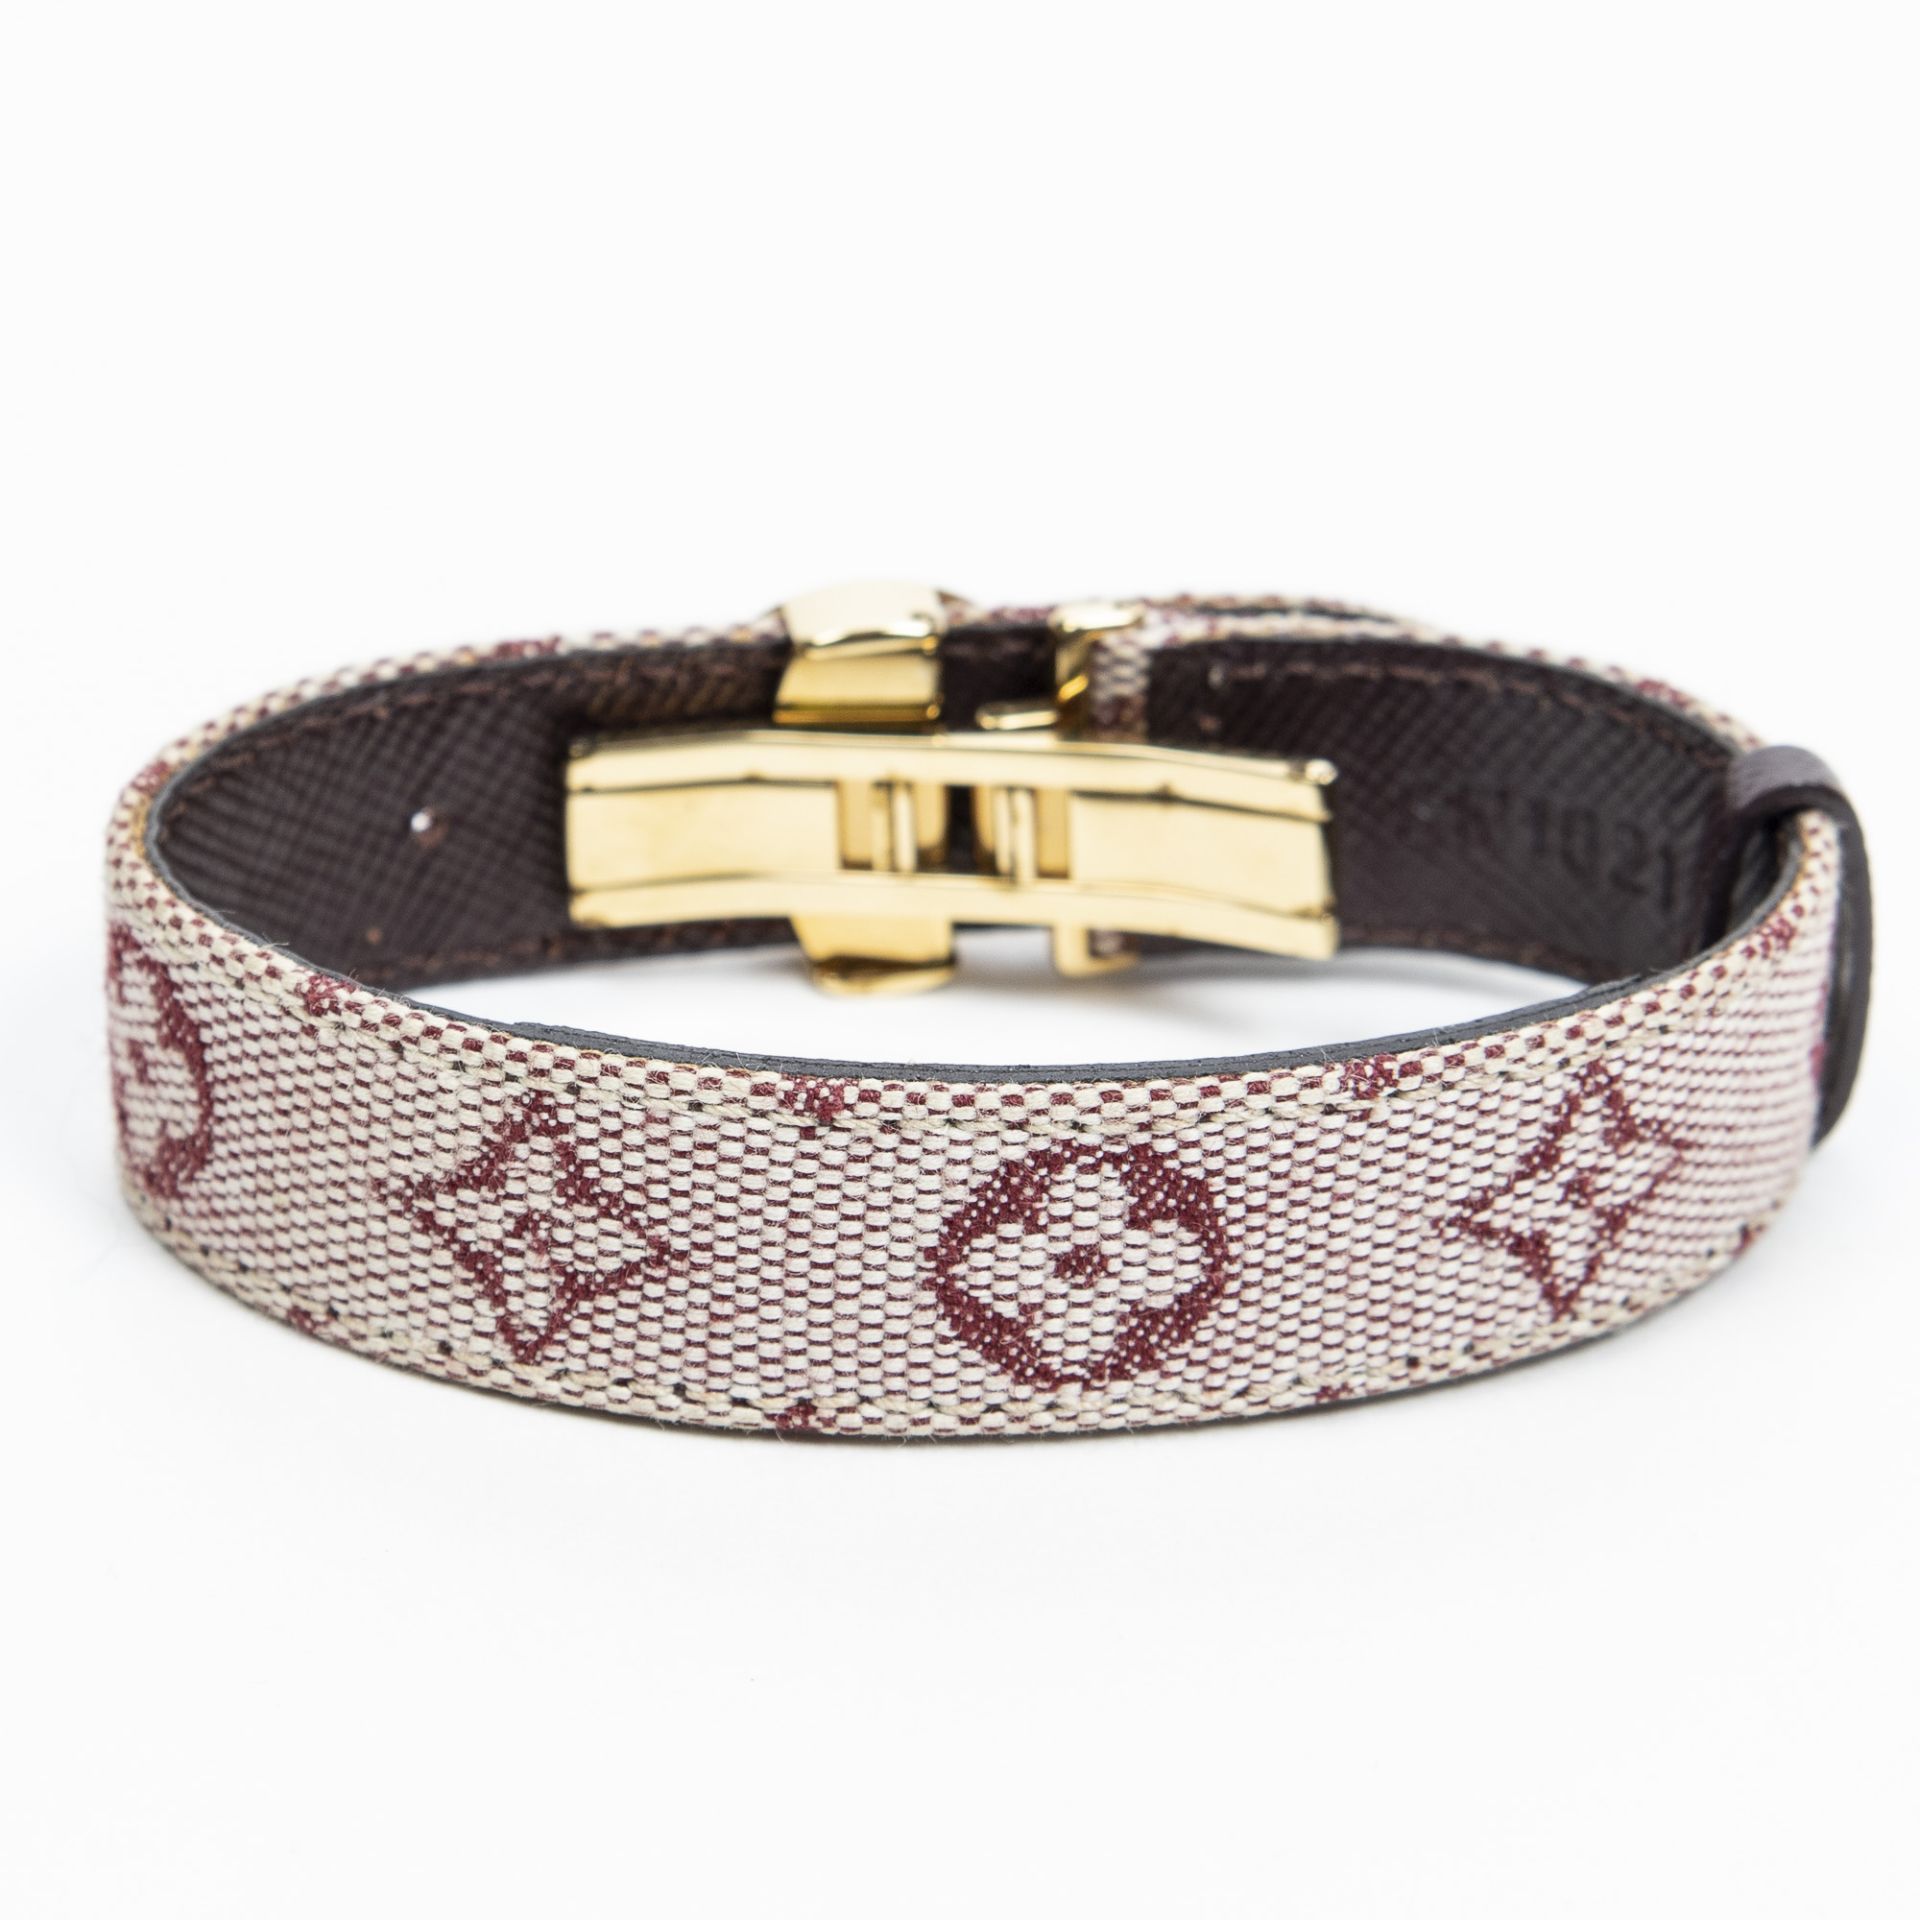 RRP £675.00 Lot To Contain 1 Louis Vuitton Monogram Canvas Good Luck Bracelet In Pink/Beige - - Image 2 of 2